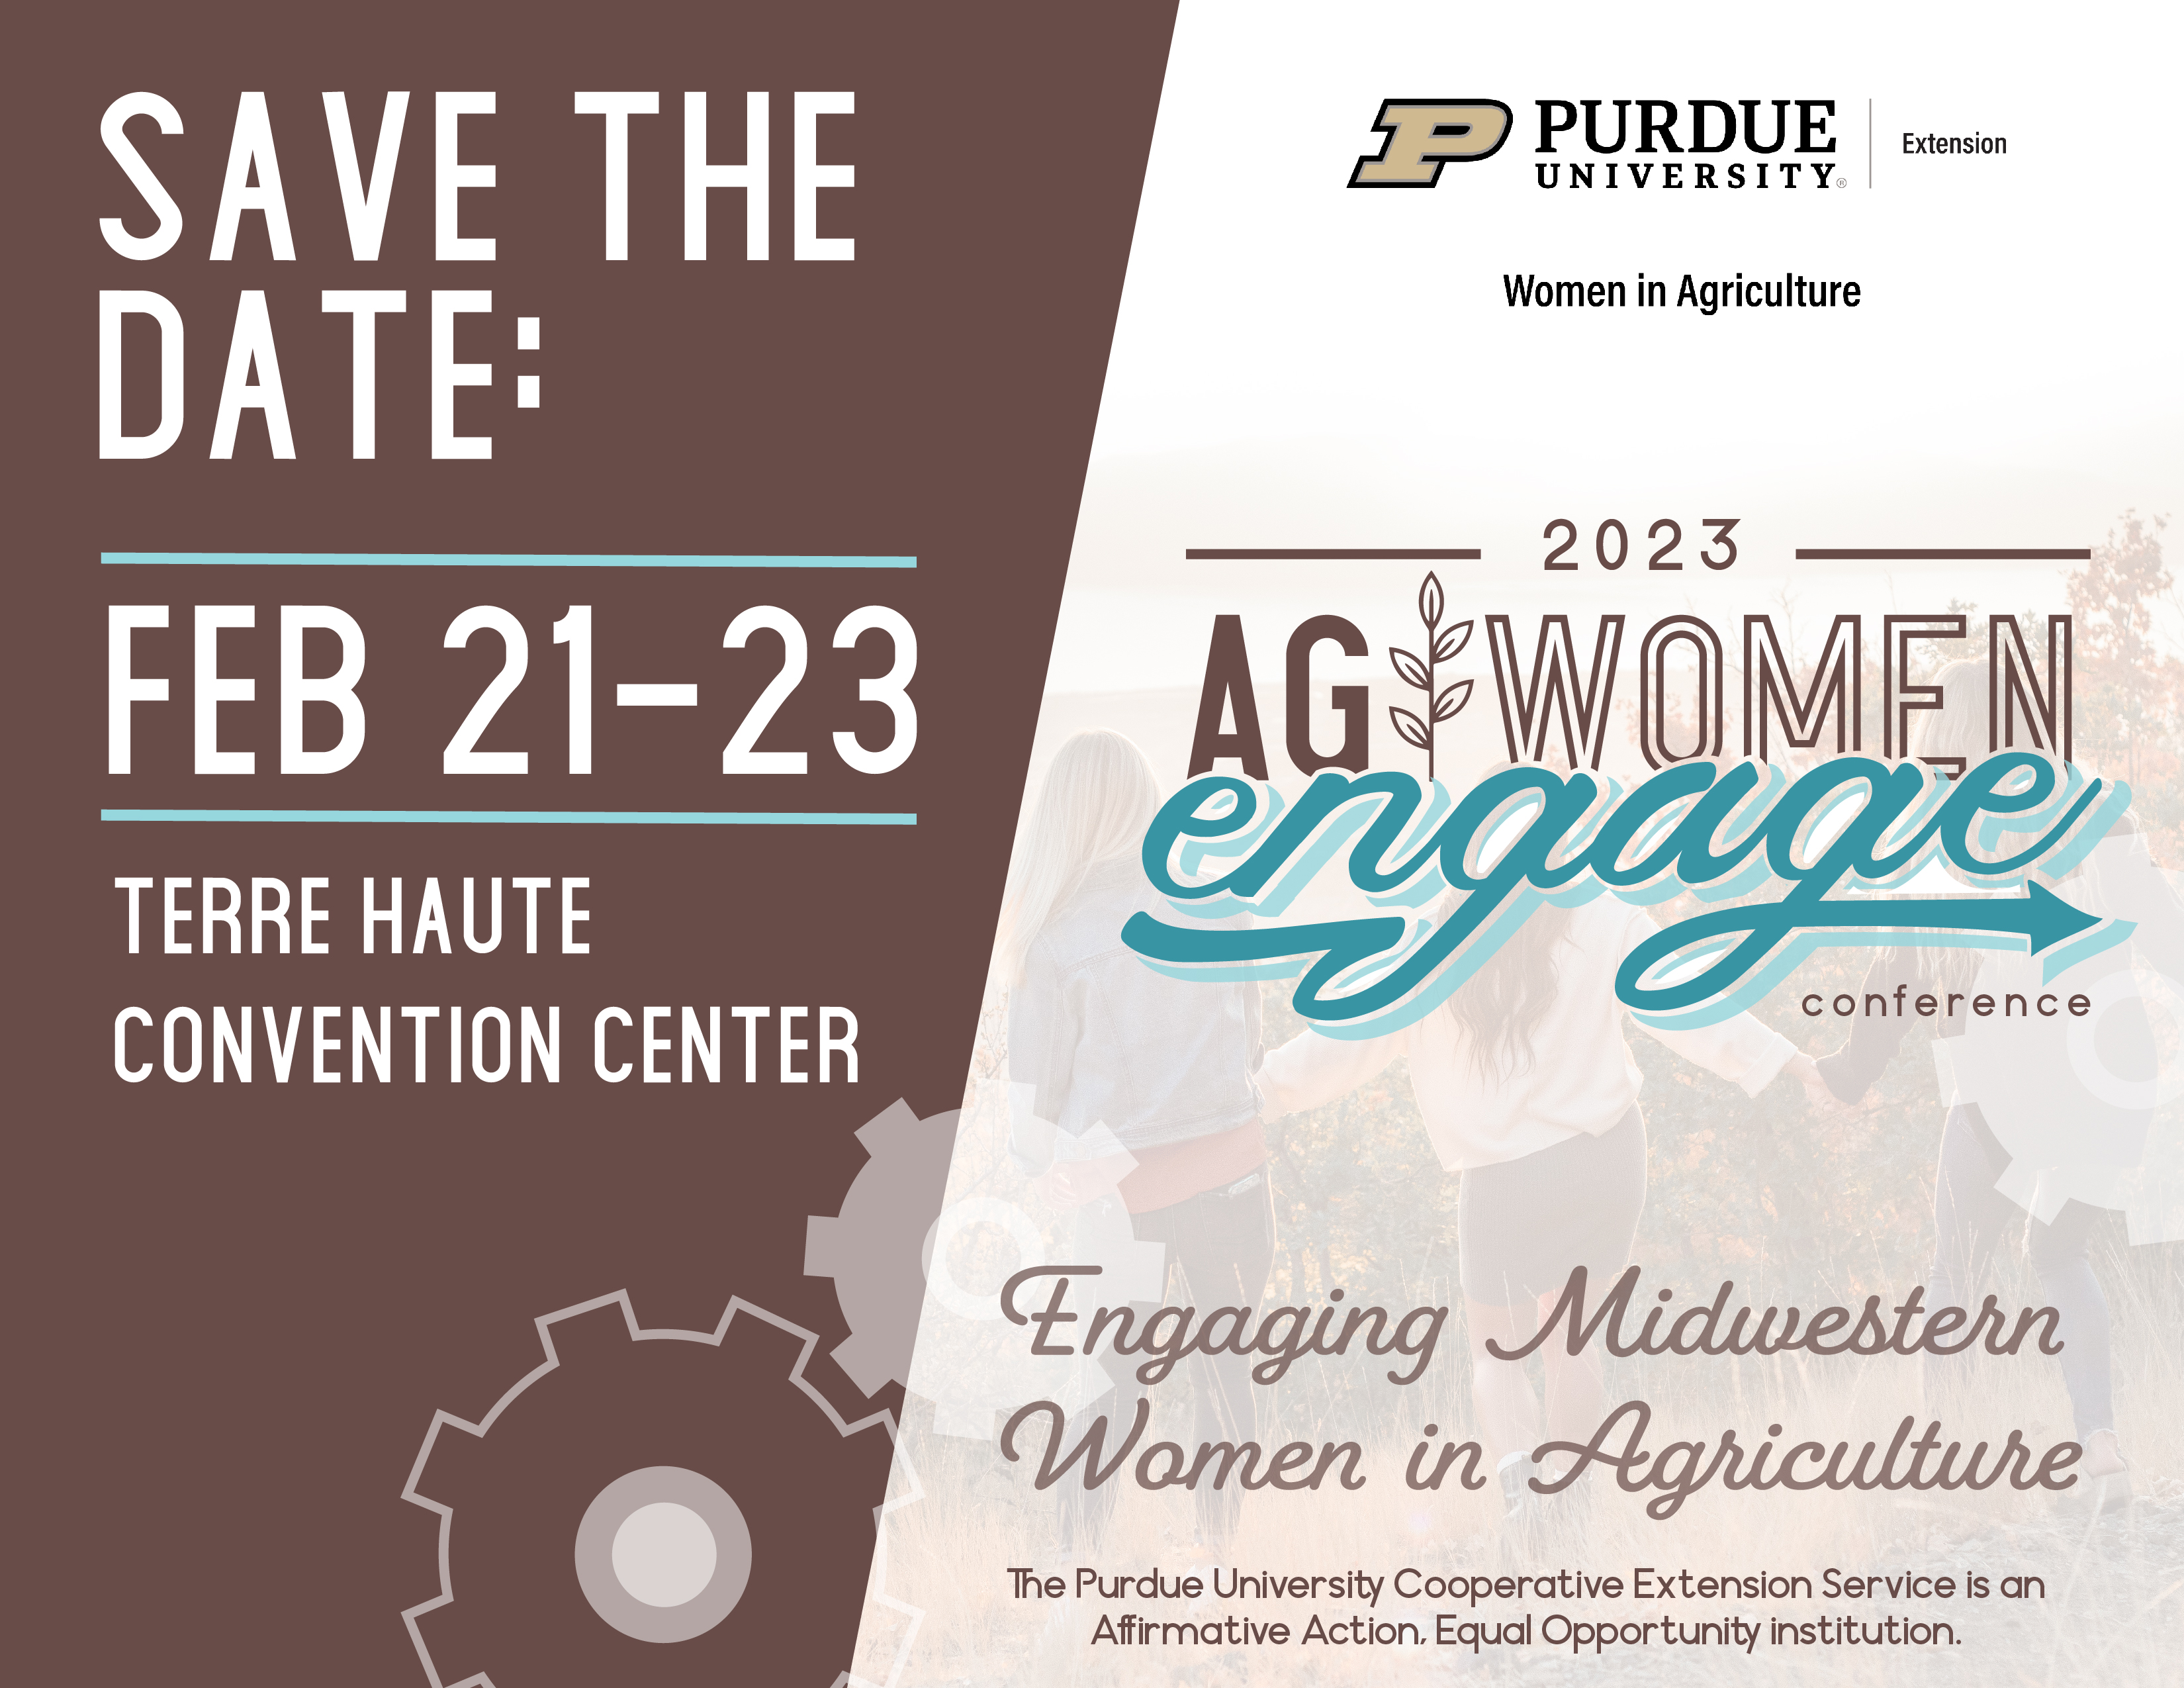 information on conference for woman farmers